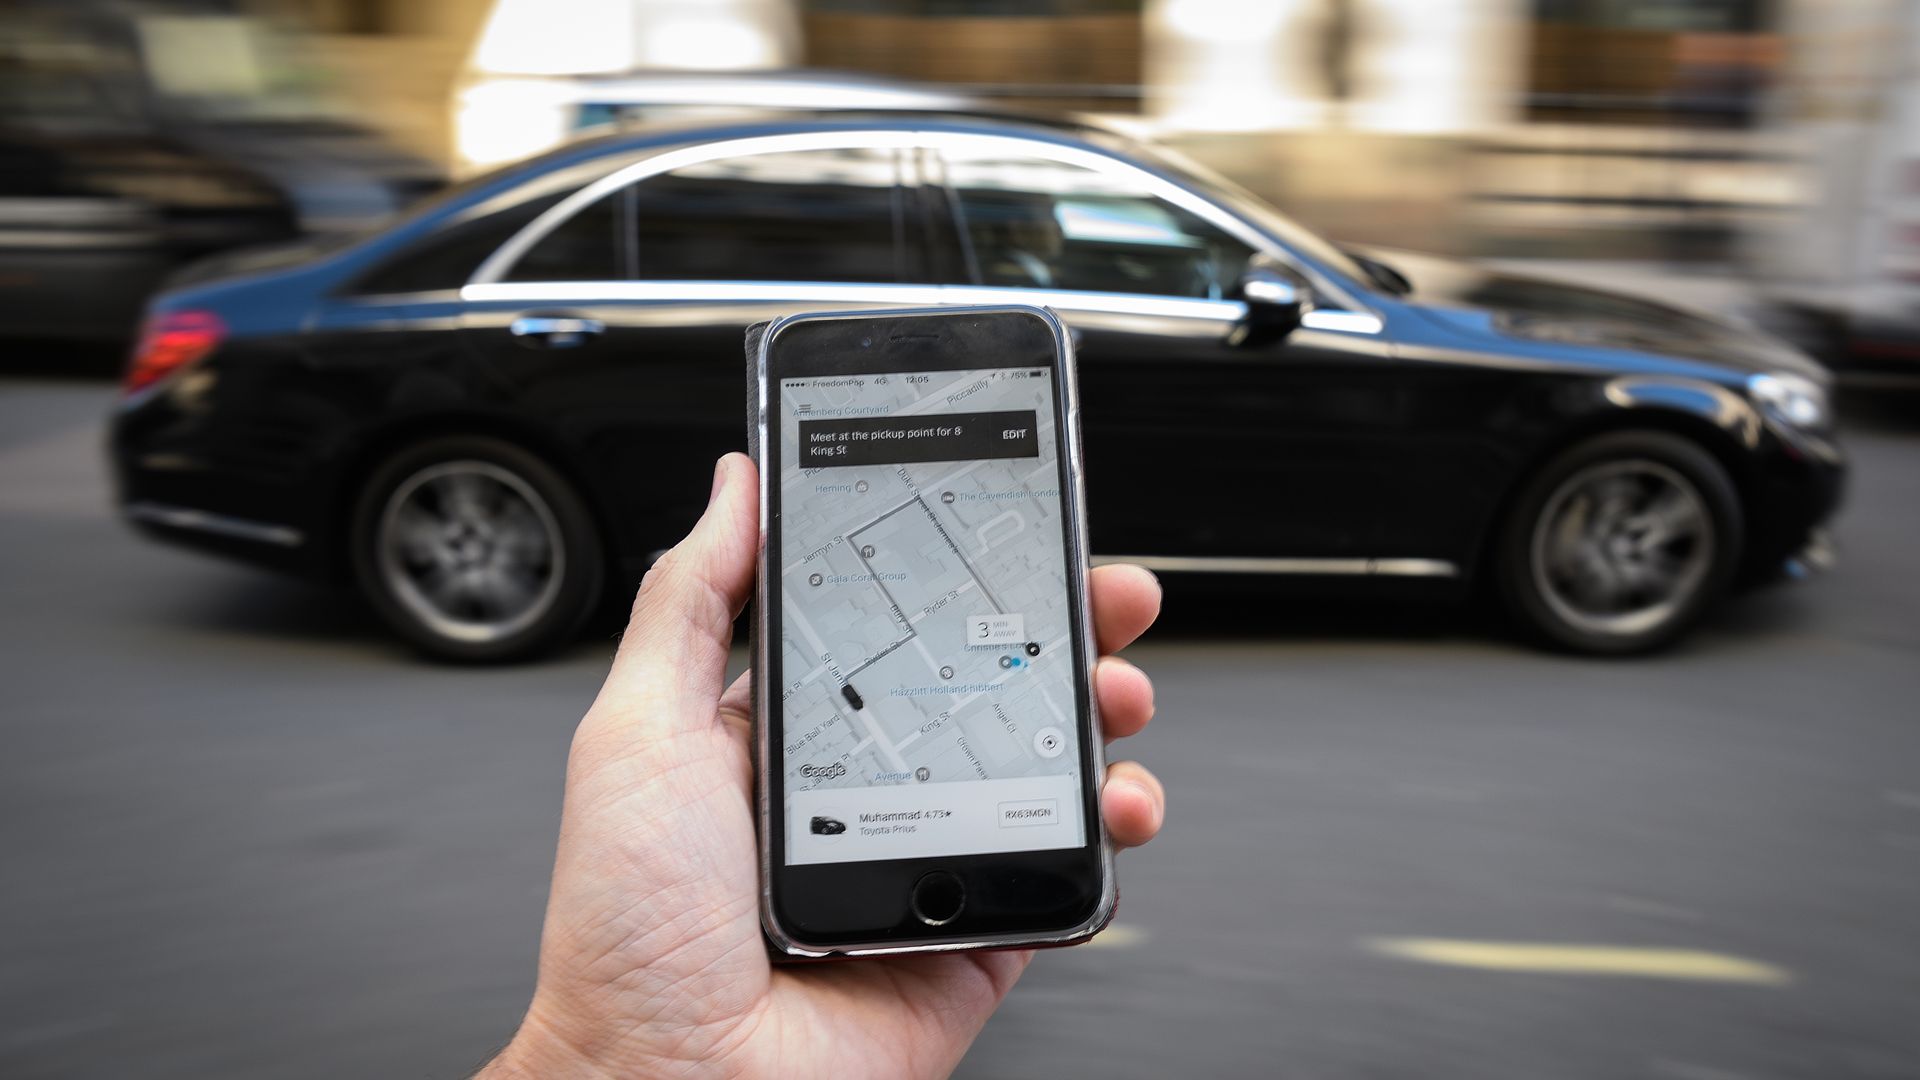 Outstretched hand holds phone with Uber app open